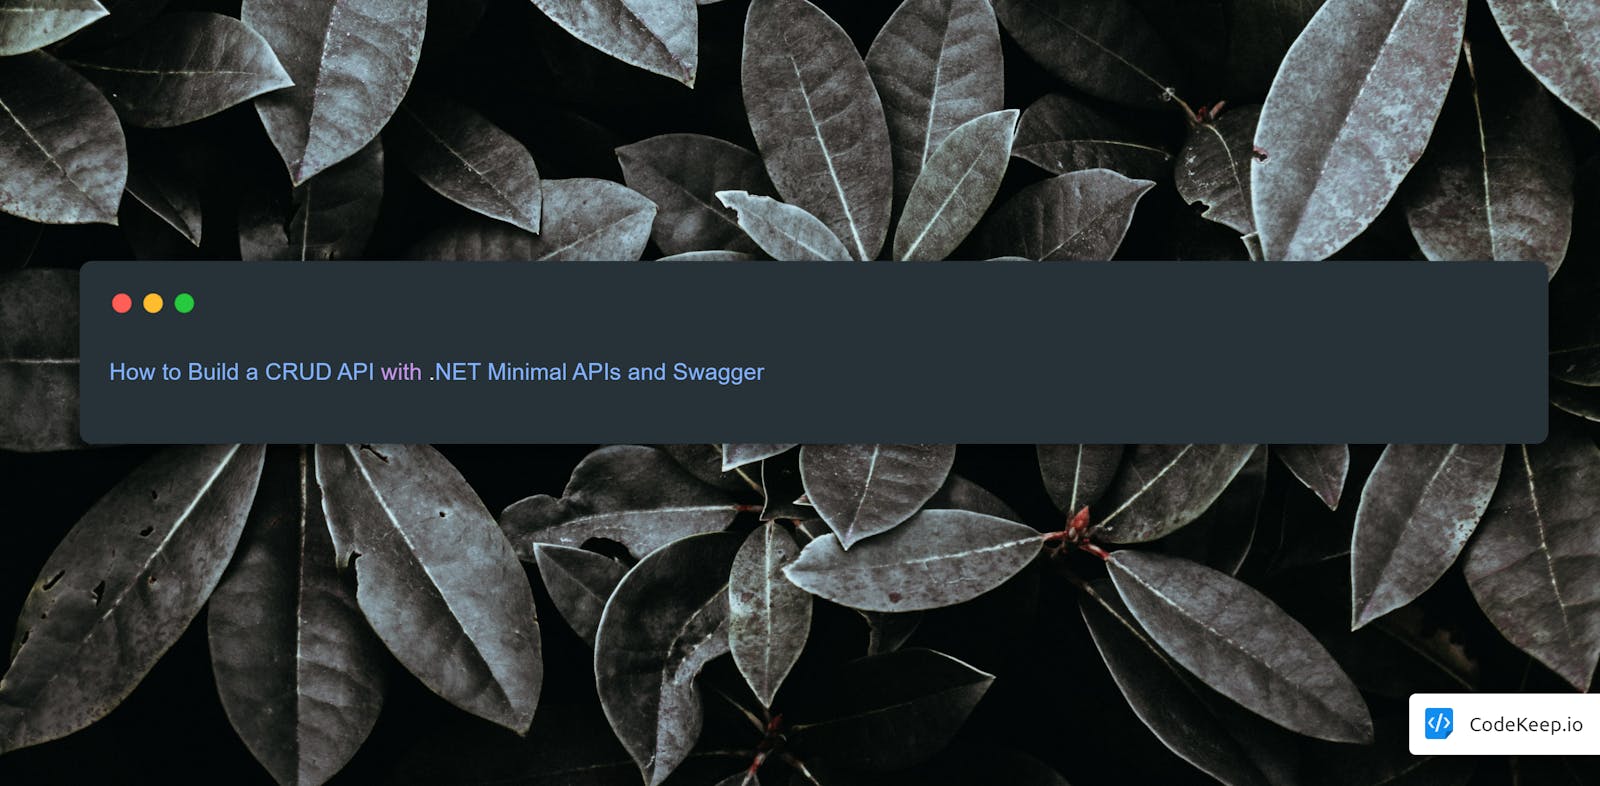 How to Build a CRUD API with .NET Minimal APIs and Swagger